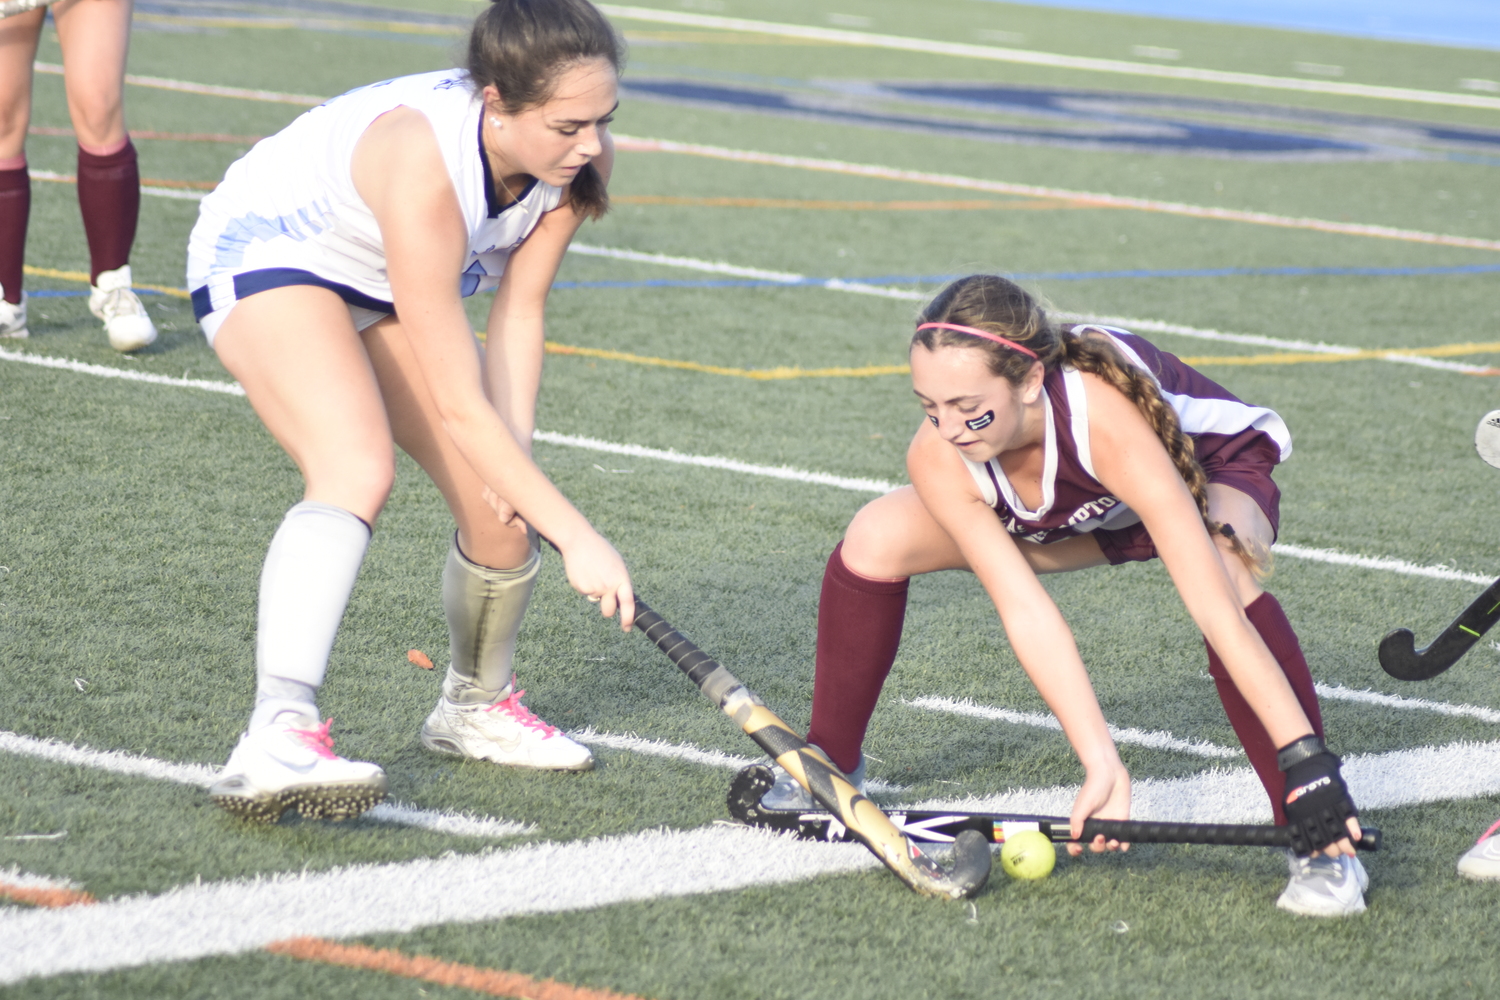 East Hampton senior defender Ally Schaefer plays the ball well to force a turnover.   DREW BUDD